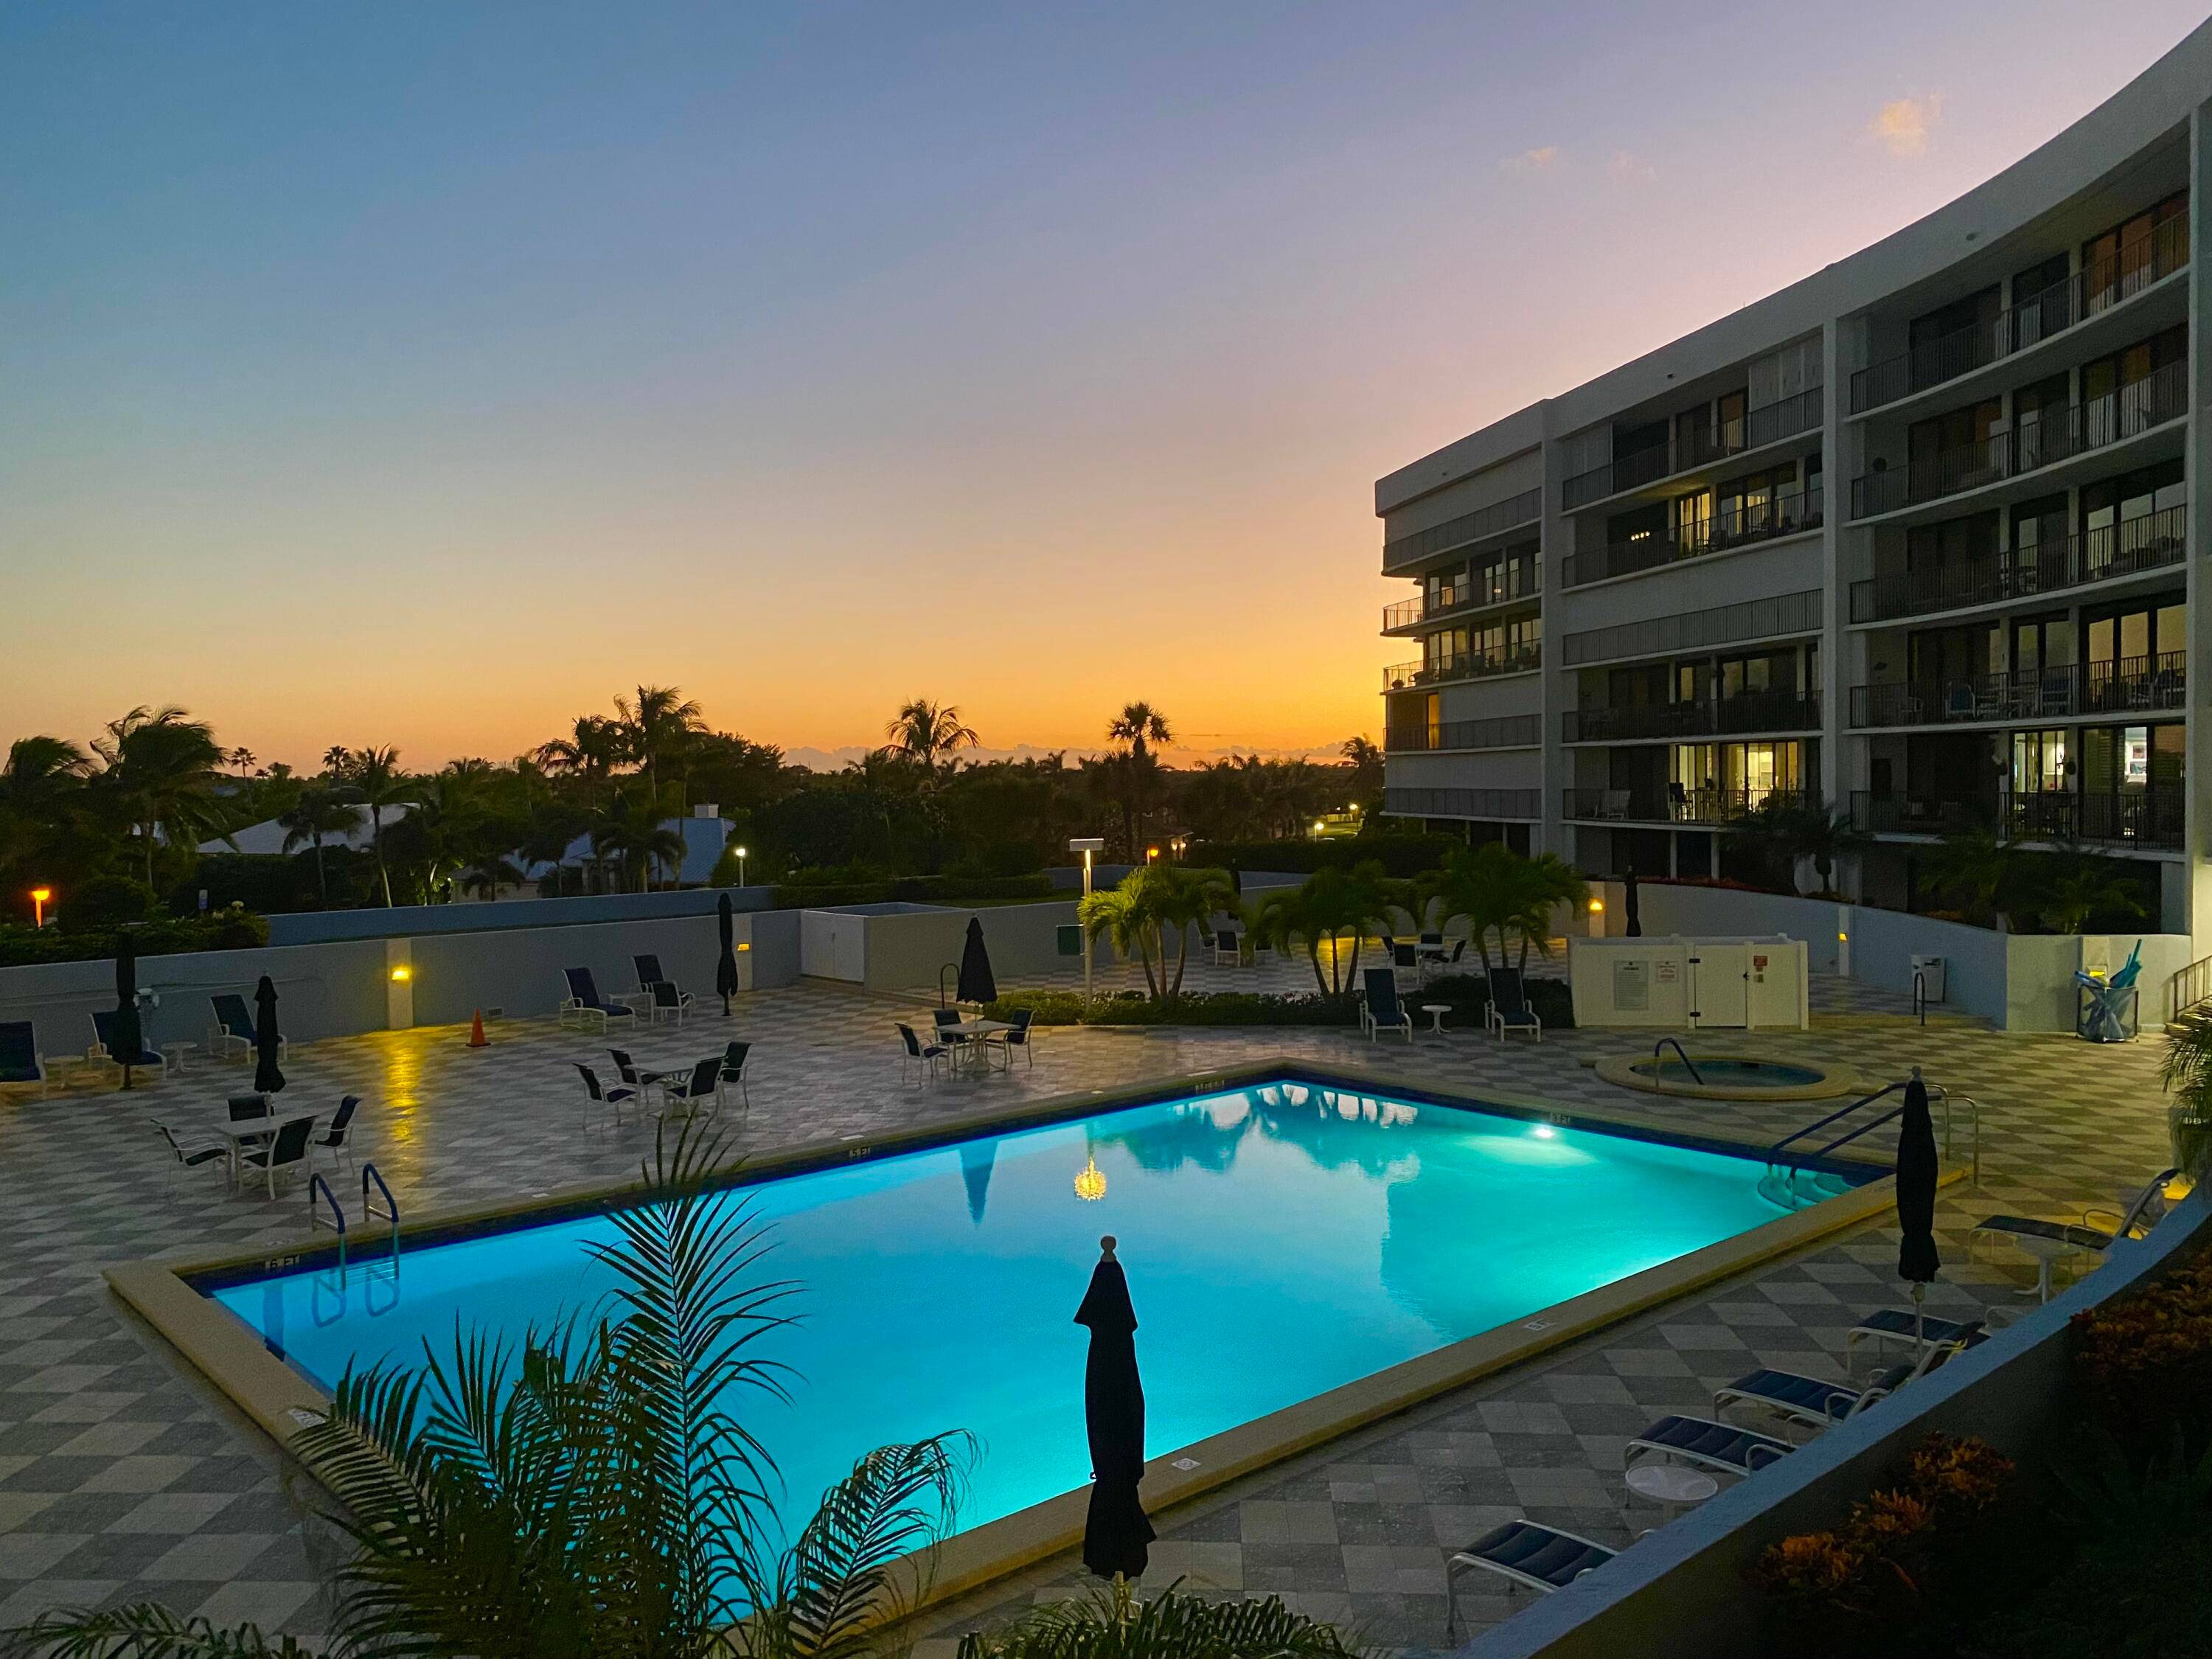 MODERN OPEN FLOOR PLAN CONDO OVERLOOKING THE BEAUTIFUL POOLVIEWS OF OCEAN AND GORGEOUS SUNSETSACROSS THE STREET FROM JUPITER BEACHAND CLOSE TO THE JUPITER INLET AND HARBOURSIDE RESTAURANTS AND SHOPPESTHIS IS ...